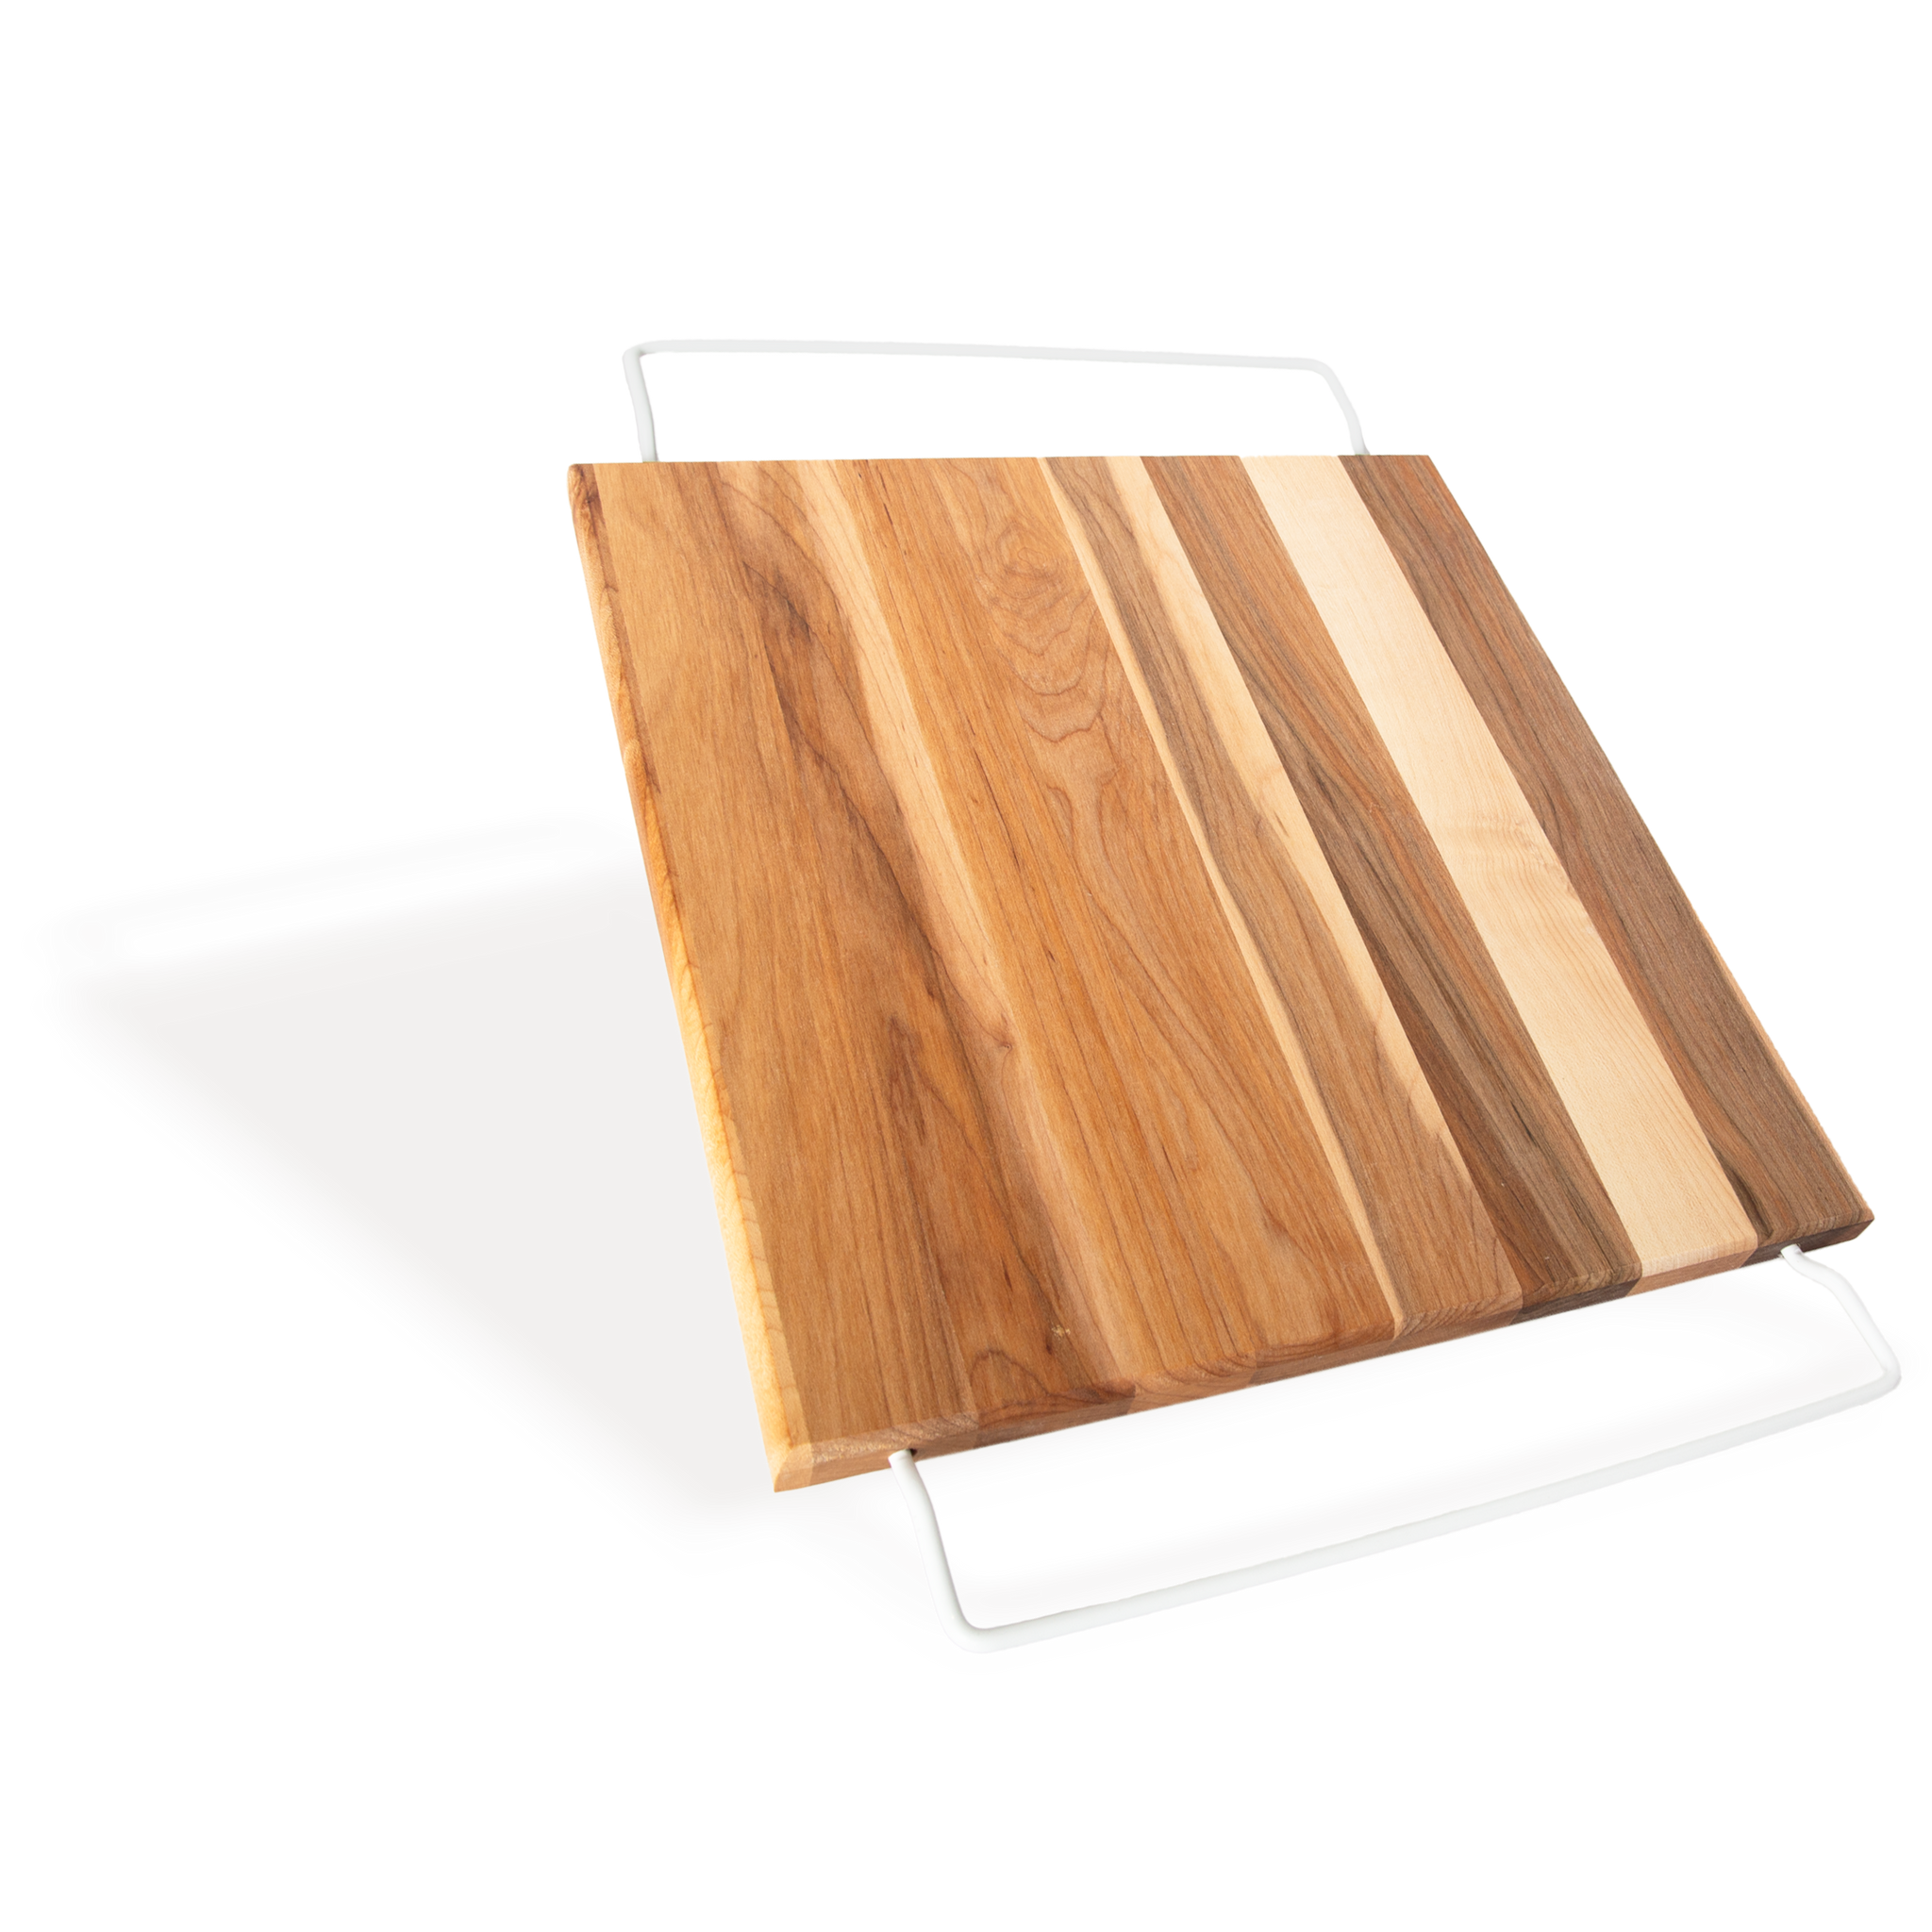 Over-the-Sink Wooden Cutting Board 13"x12"